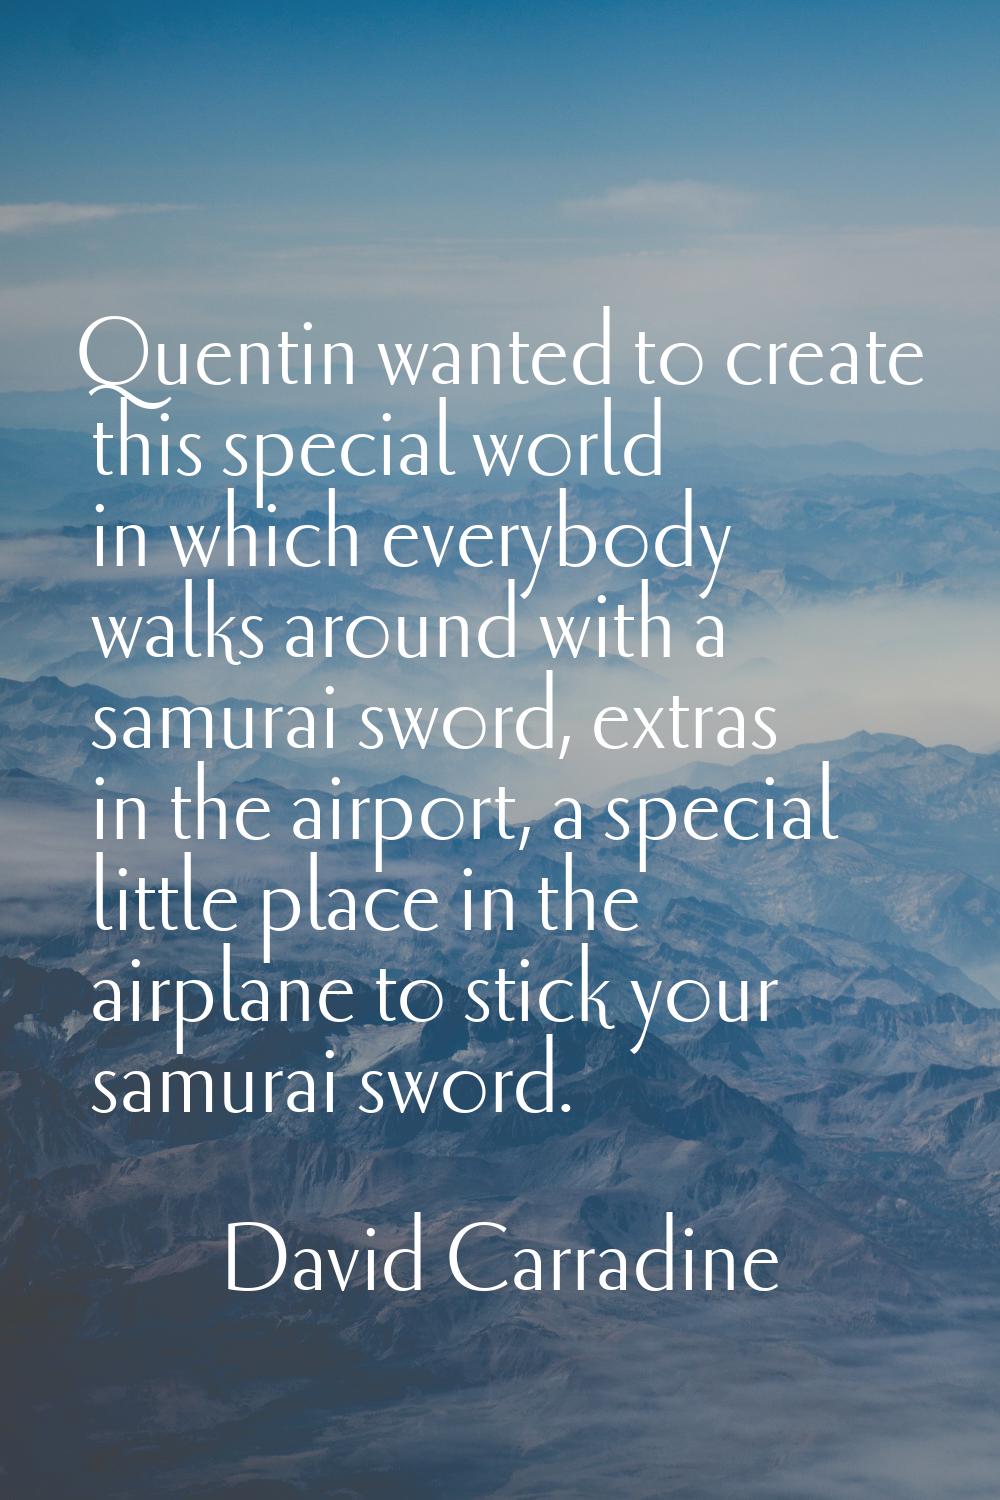 Quentin wanted to create this special world in which everybody walks around with a samurai sword, e